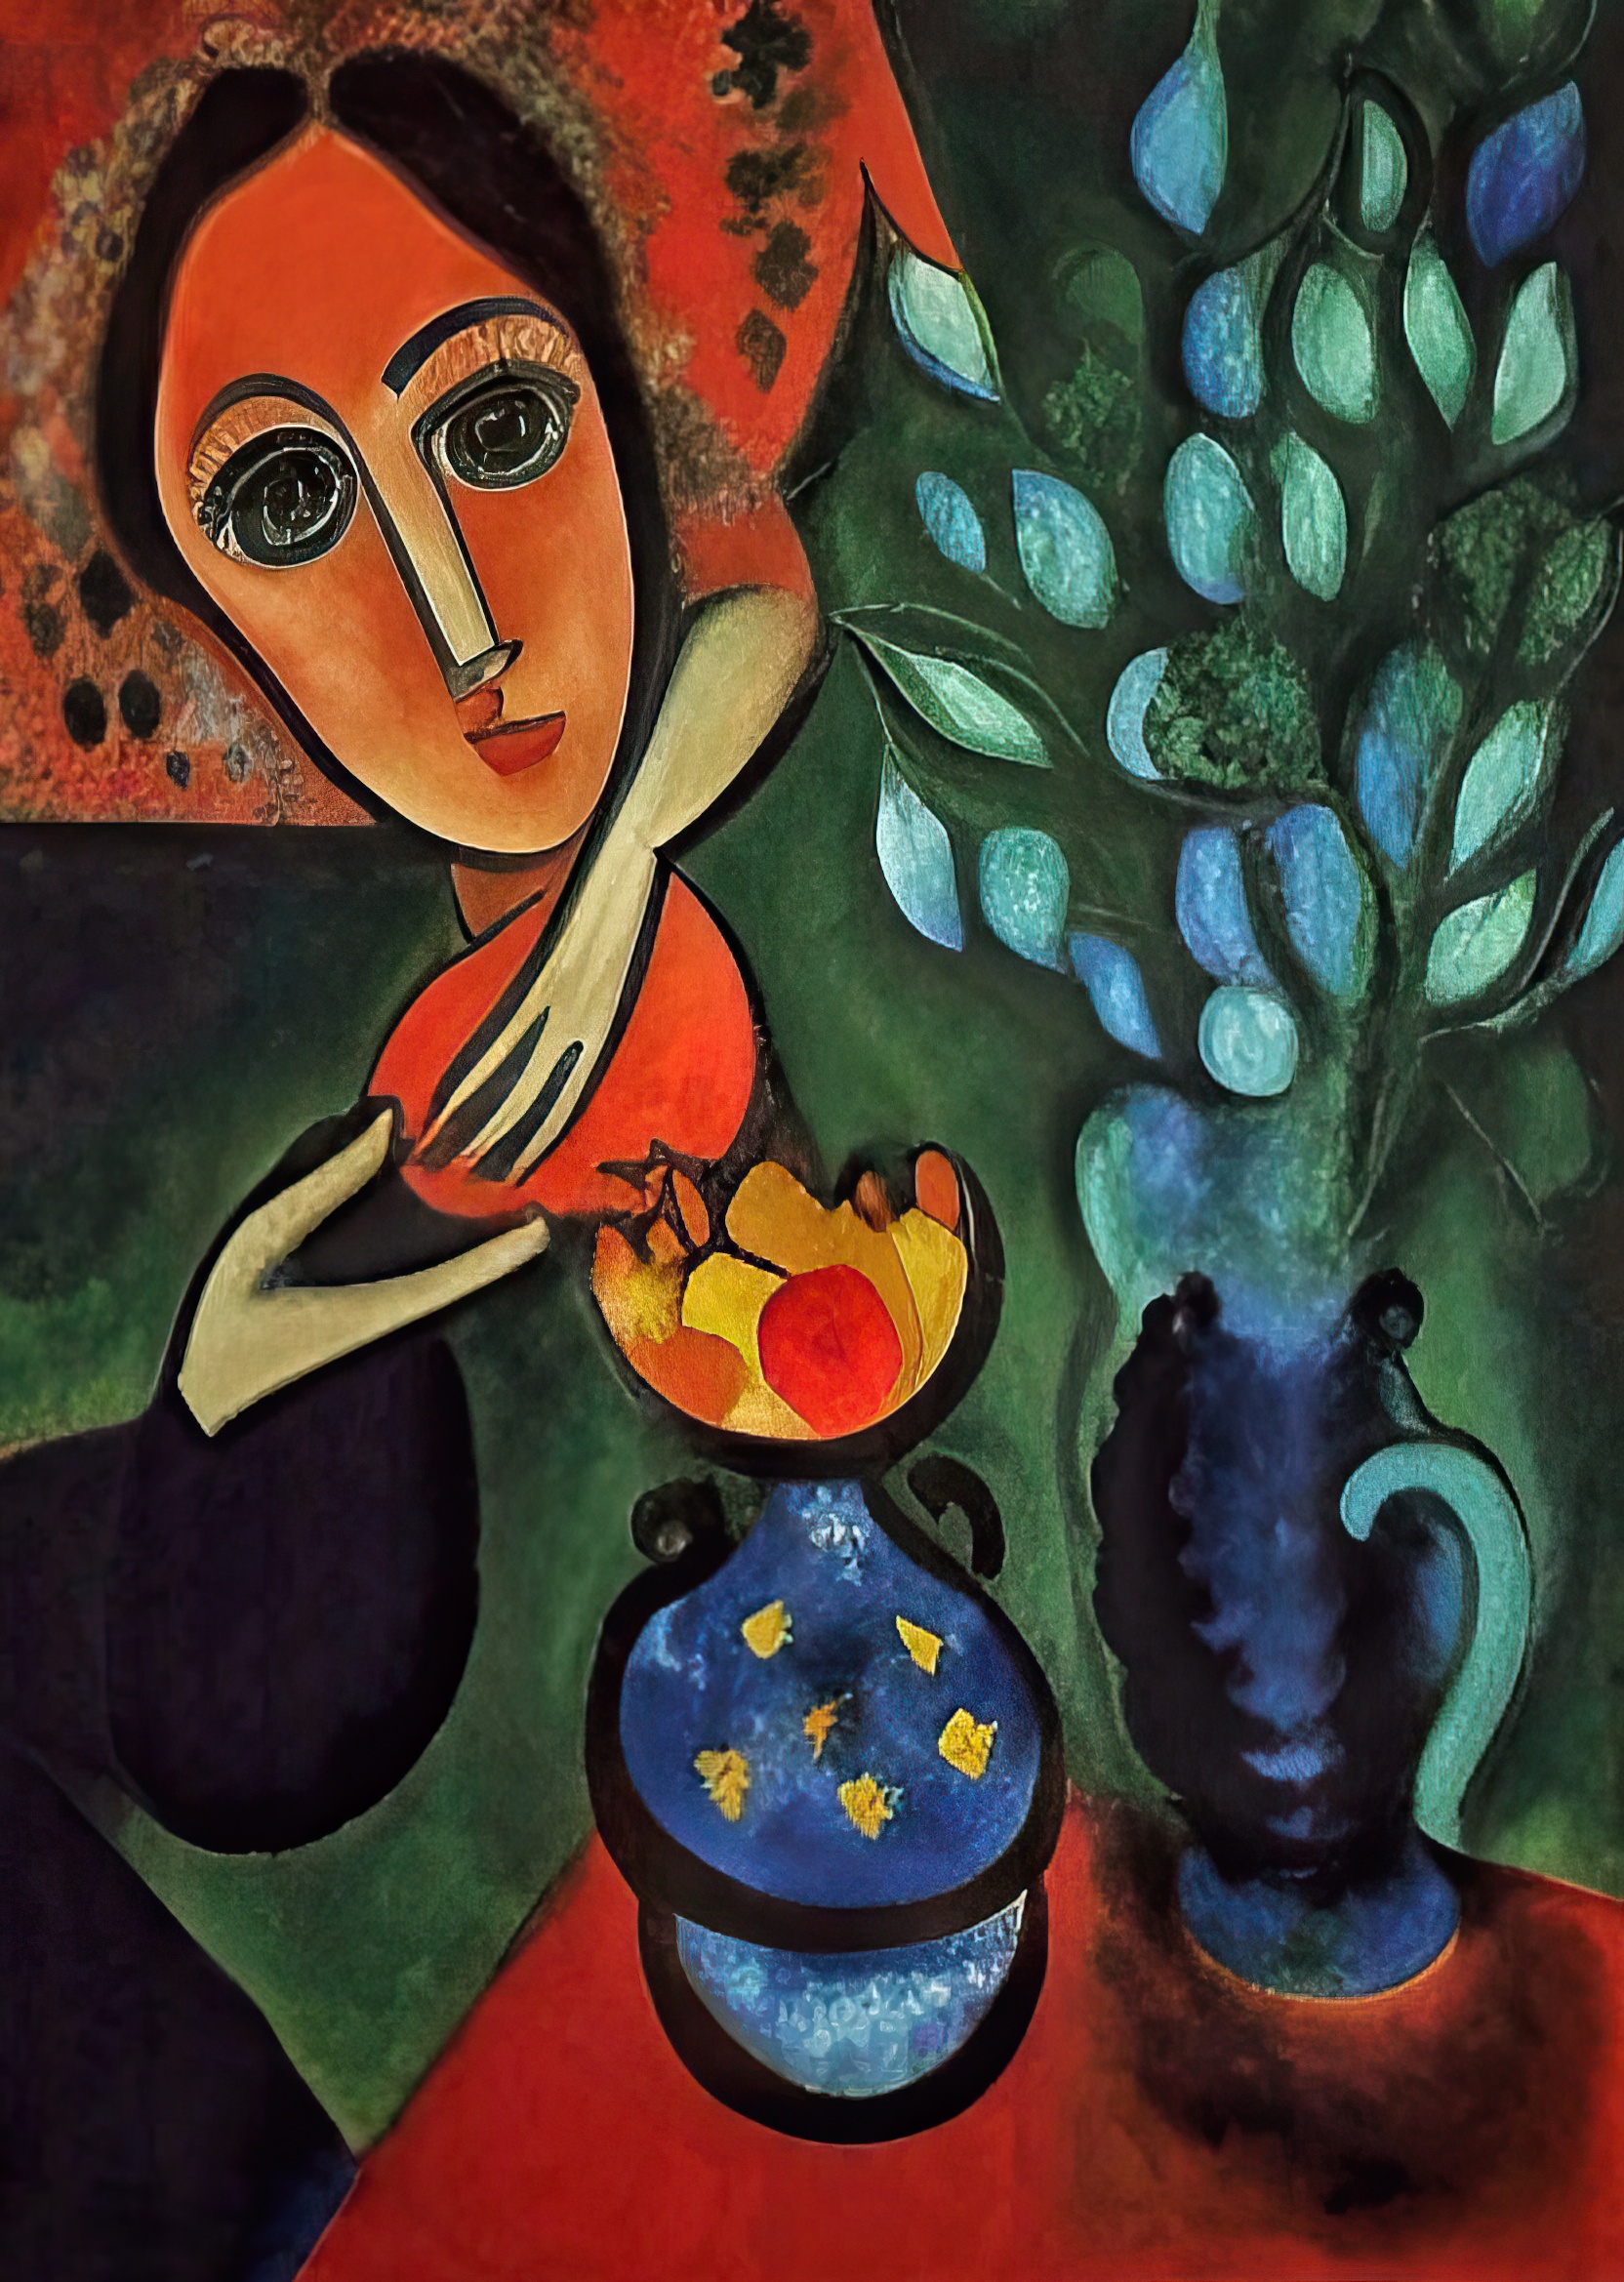 'The Woman and the Blue Vases' |Paolo Galleri|